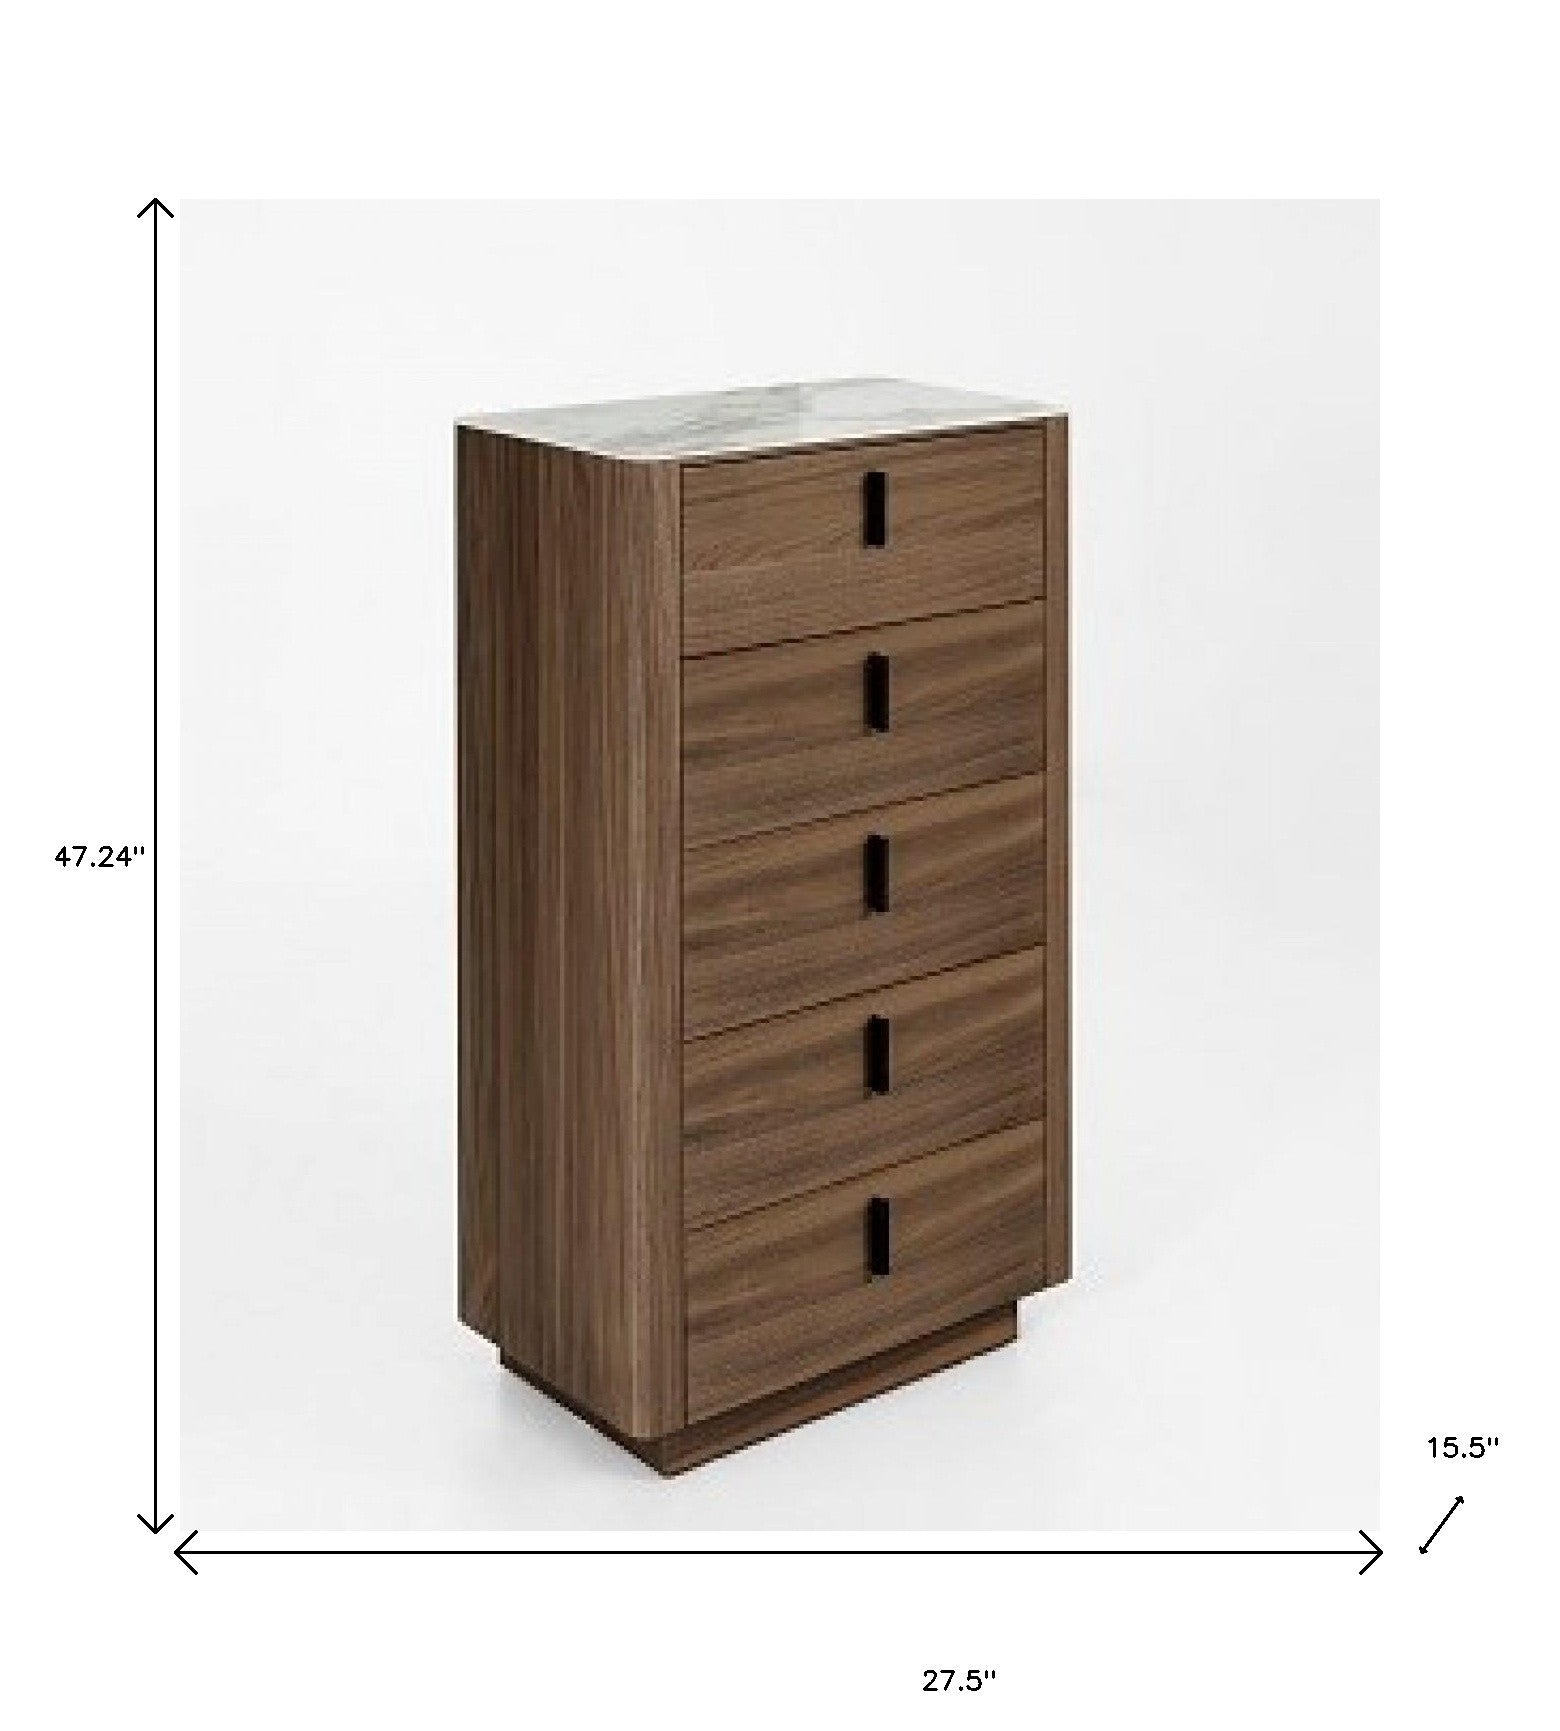 28" Walnut White Marble Manufactured Wood + Solid Wood Stainless Steel Five Drawer Chest